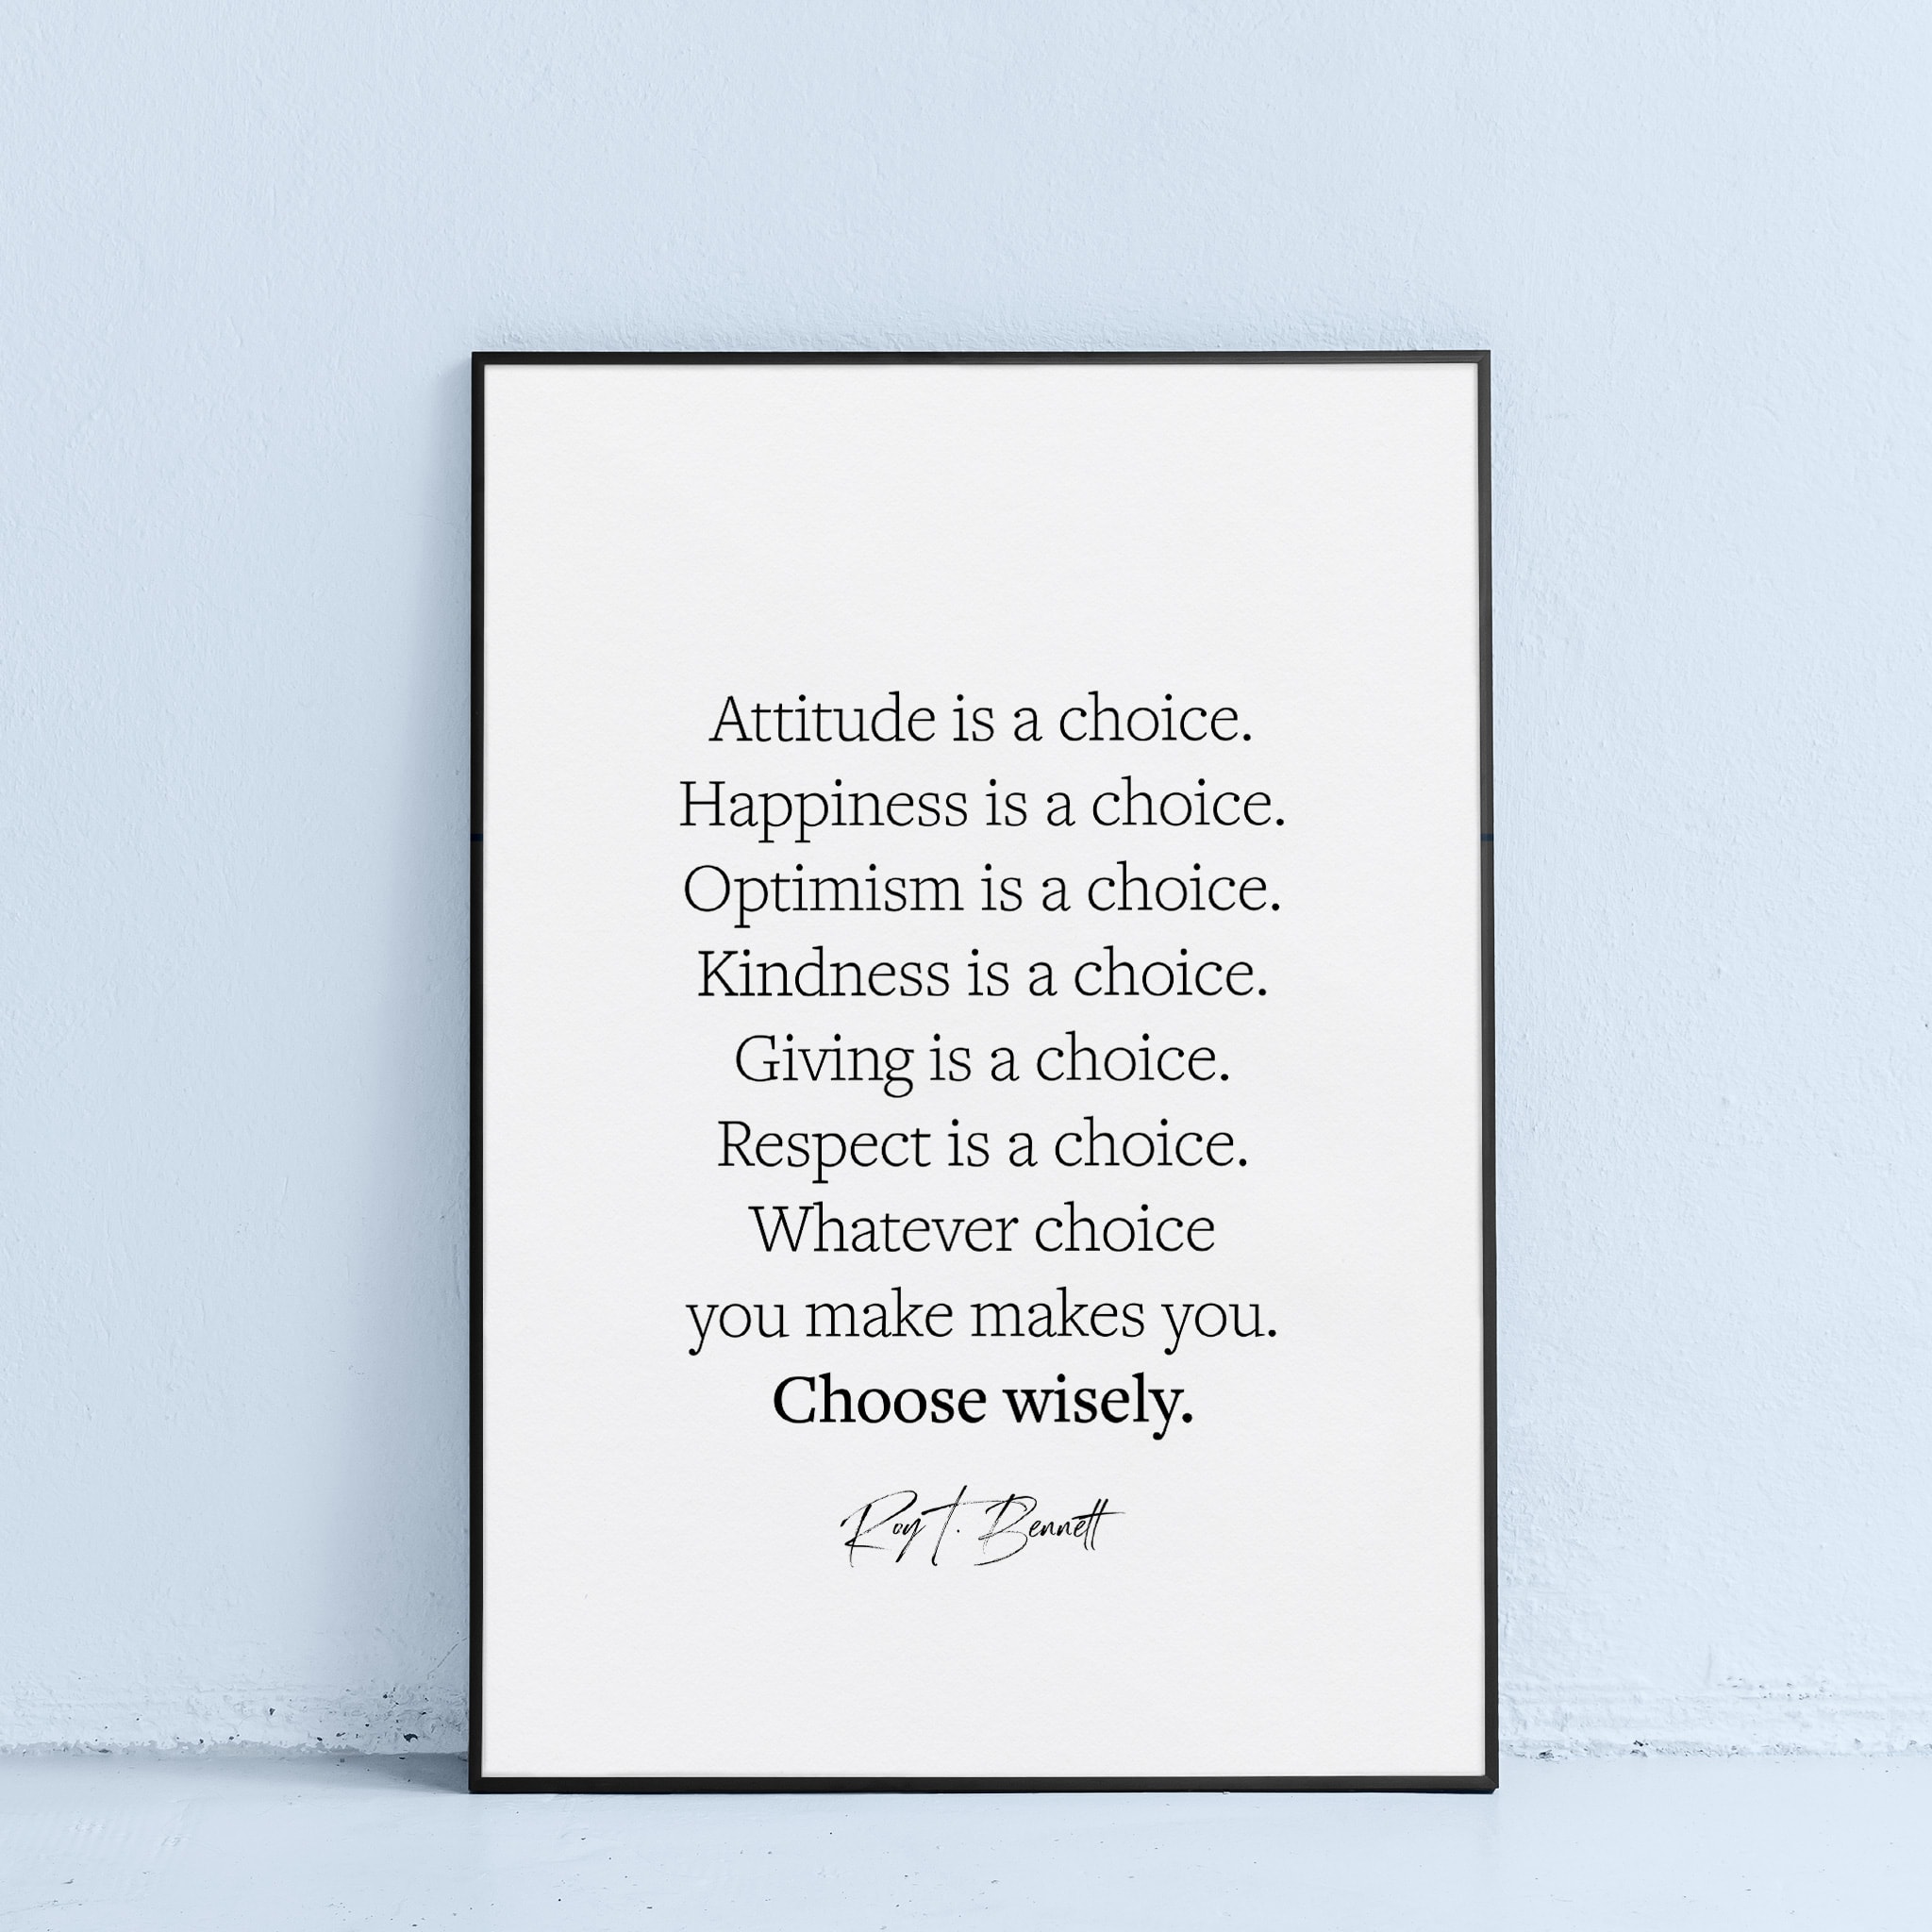 attitude is a choice roy t bennett quote poster to print at home